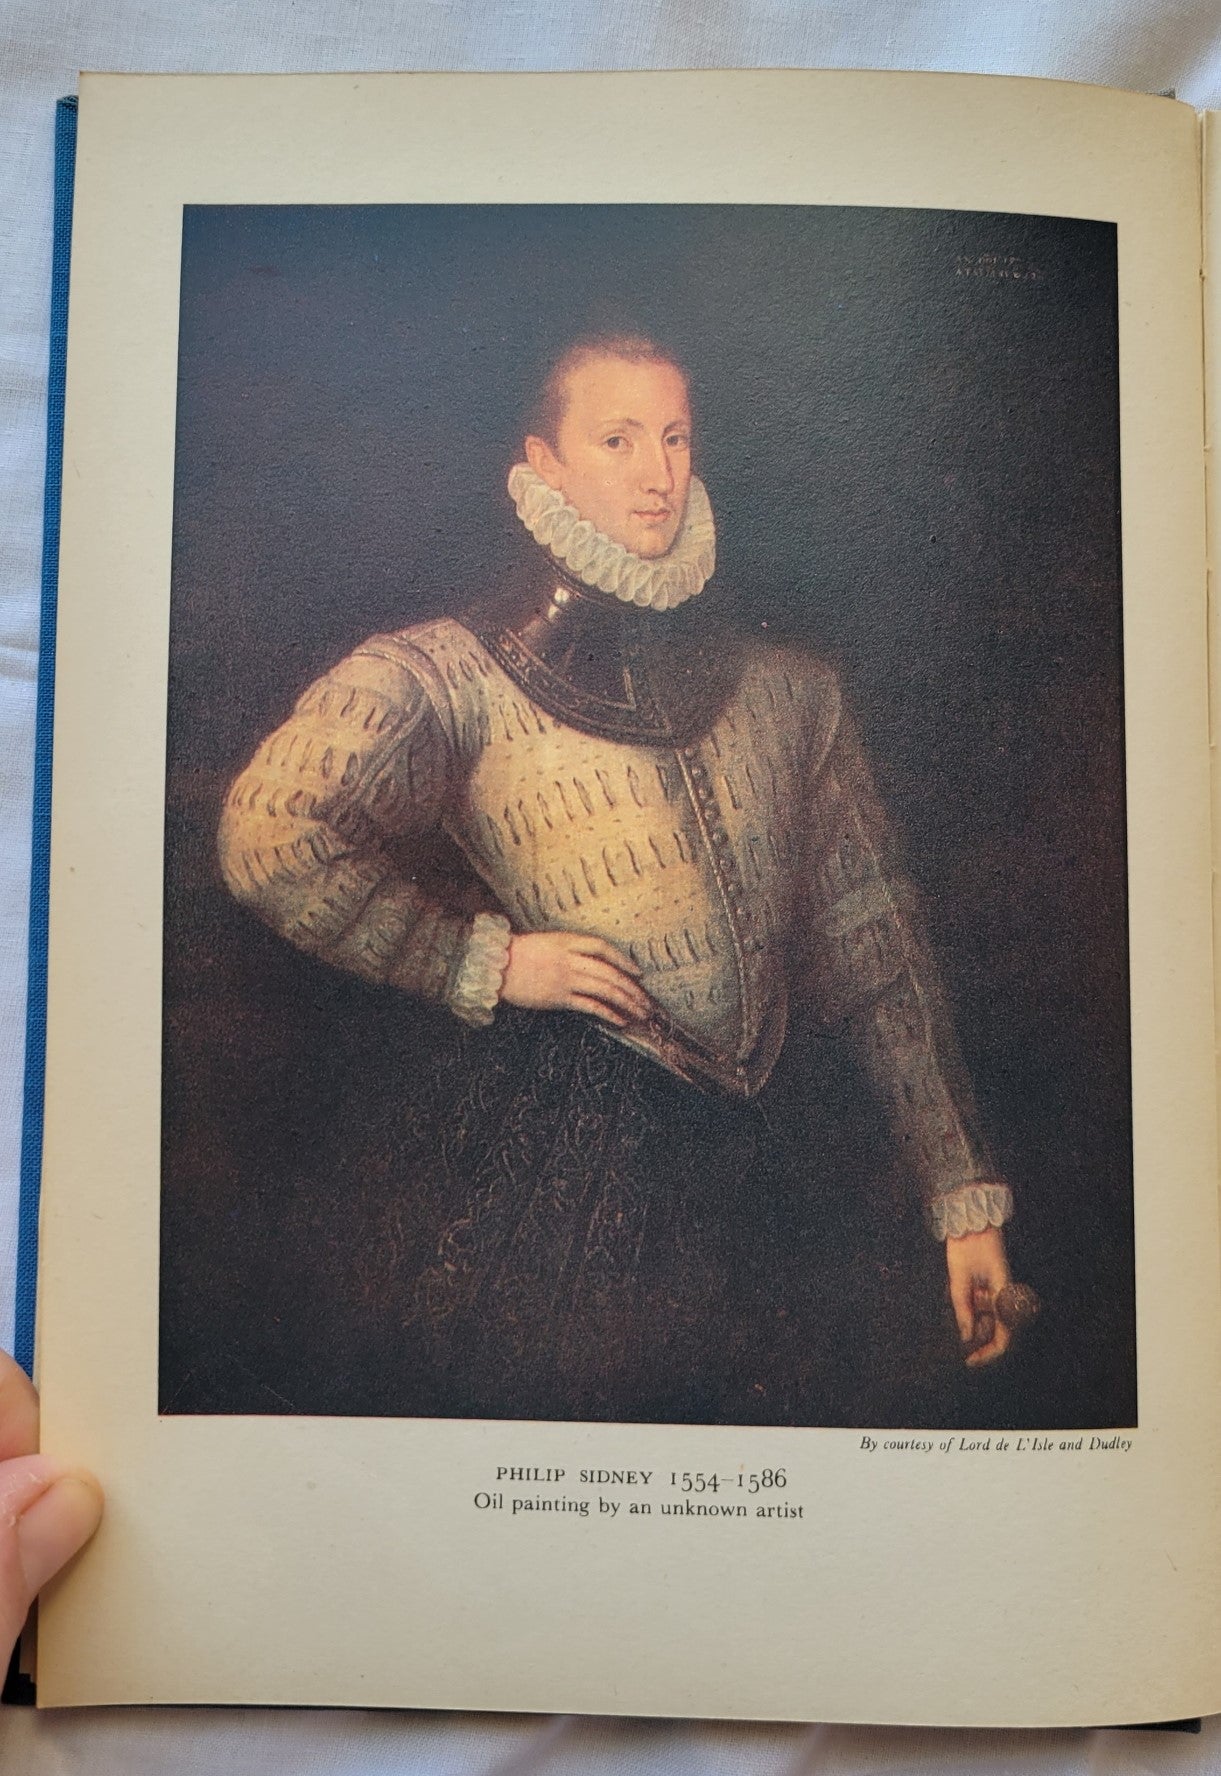 Vintage book for sale "The English Poets" by Lord David Cecil, published by Hastings House, 1940. Picture of Philip Sidney.